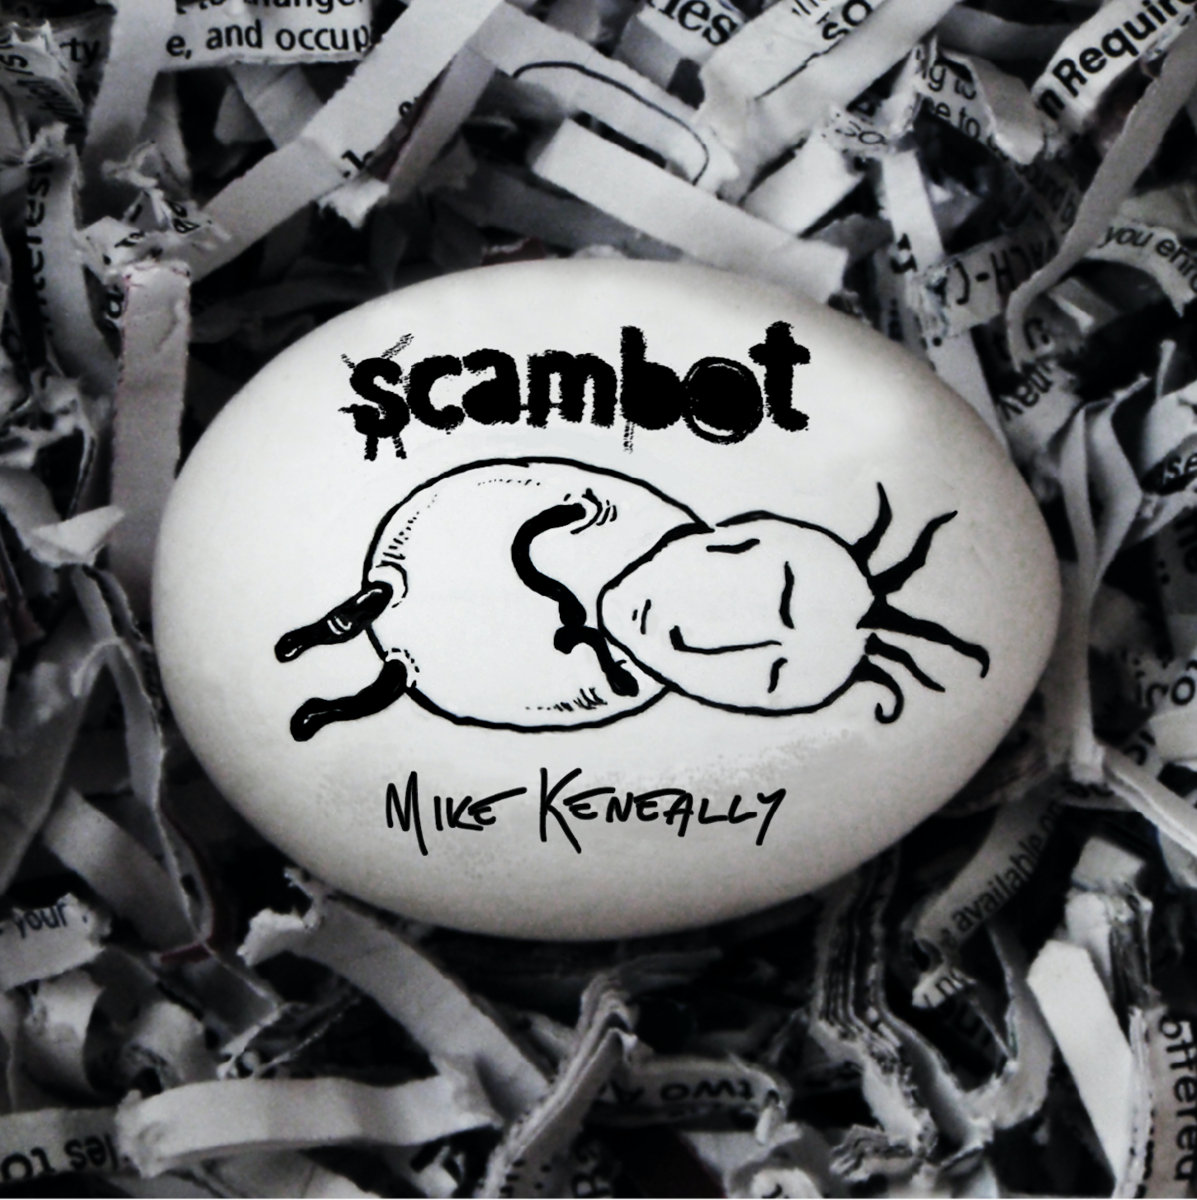 Scambot Mike Keneally